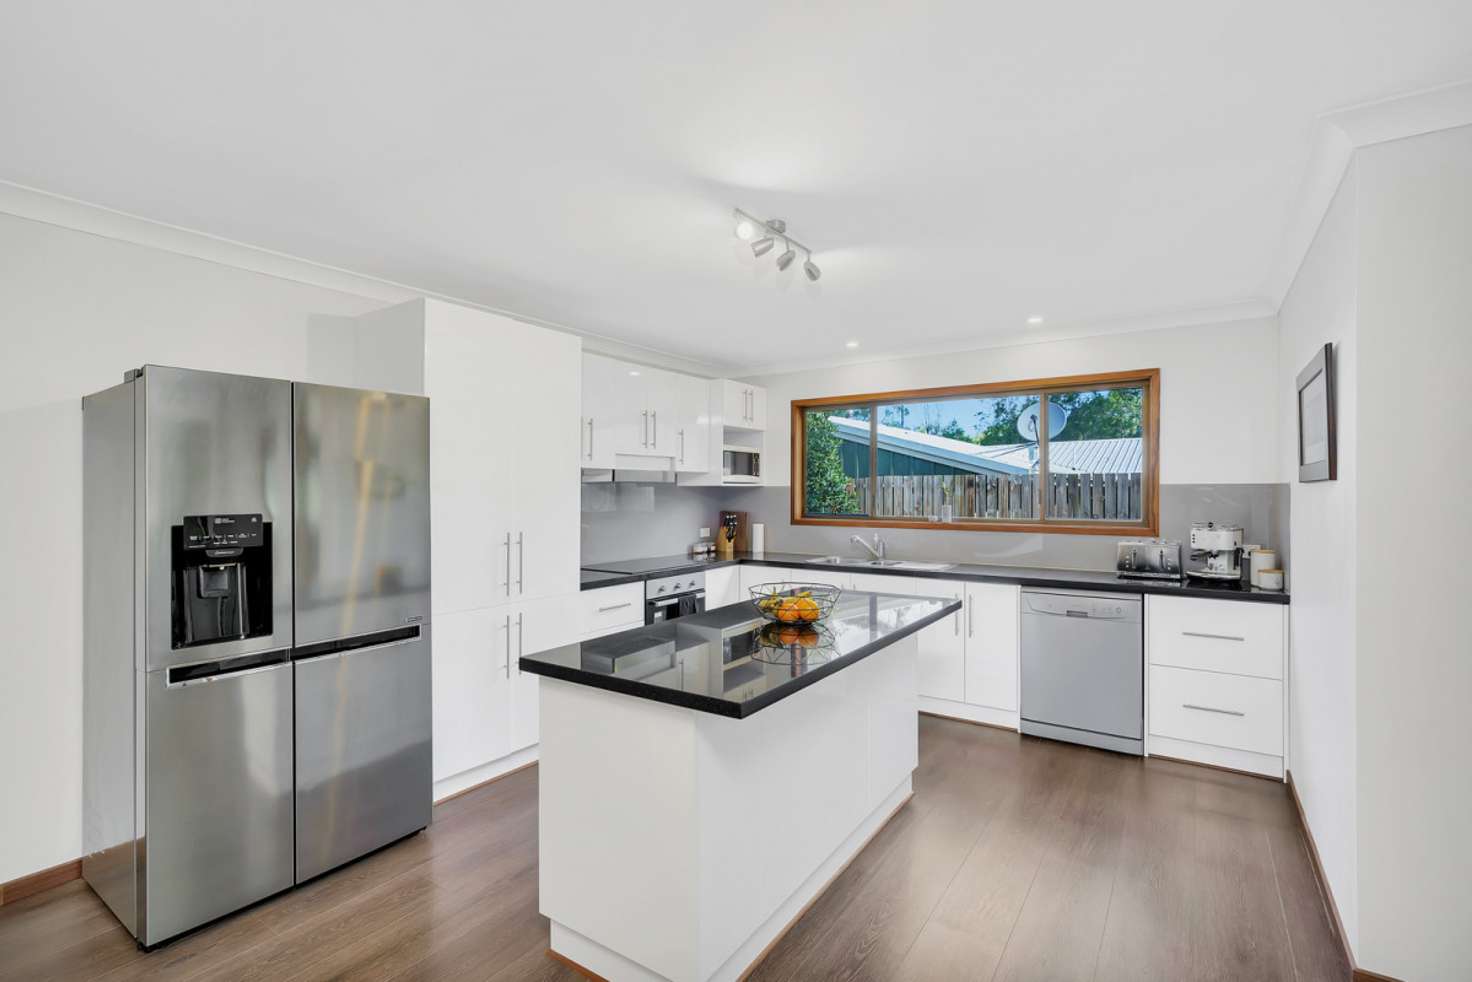 Main view of Homely house listing, 208 Dugandan Street, Nerang QLD 4211